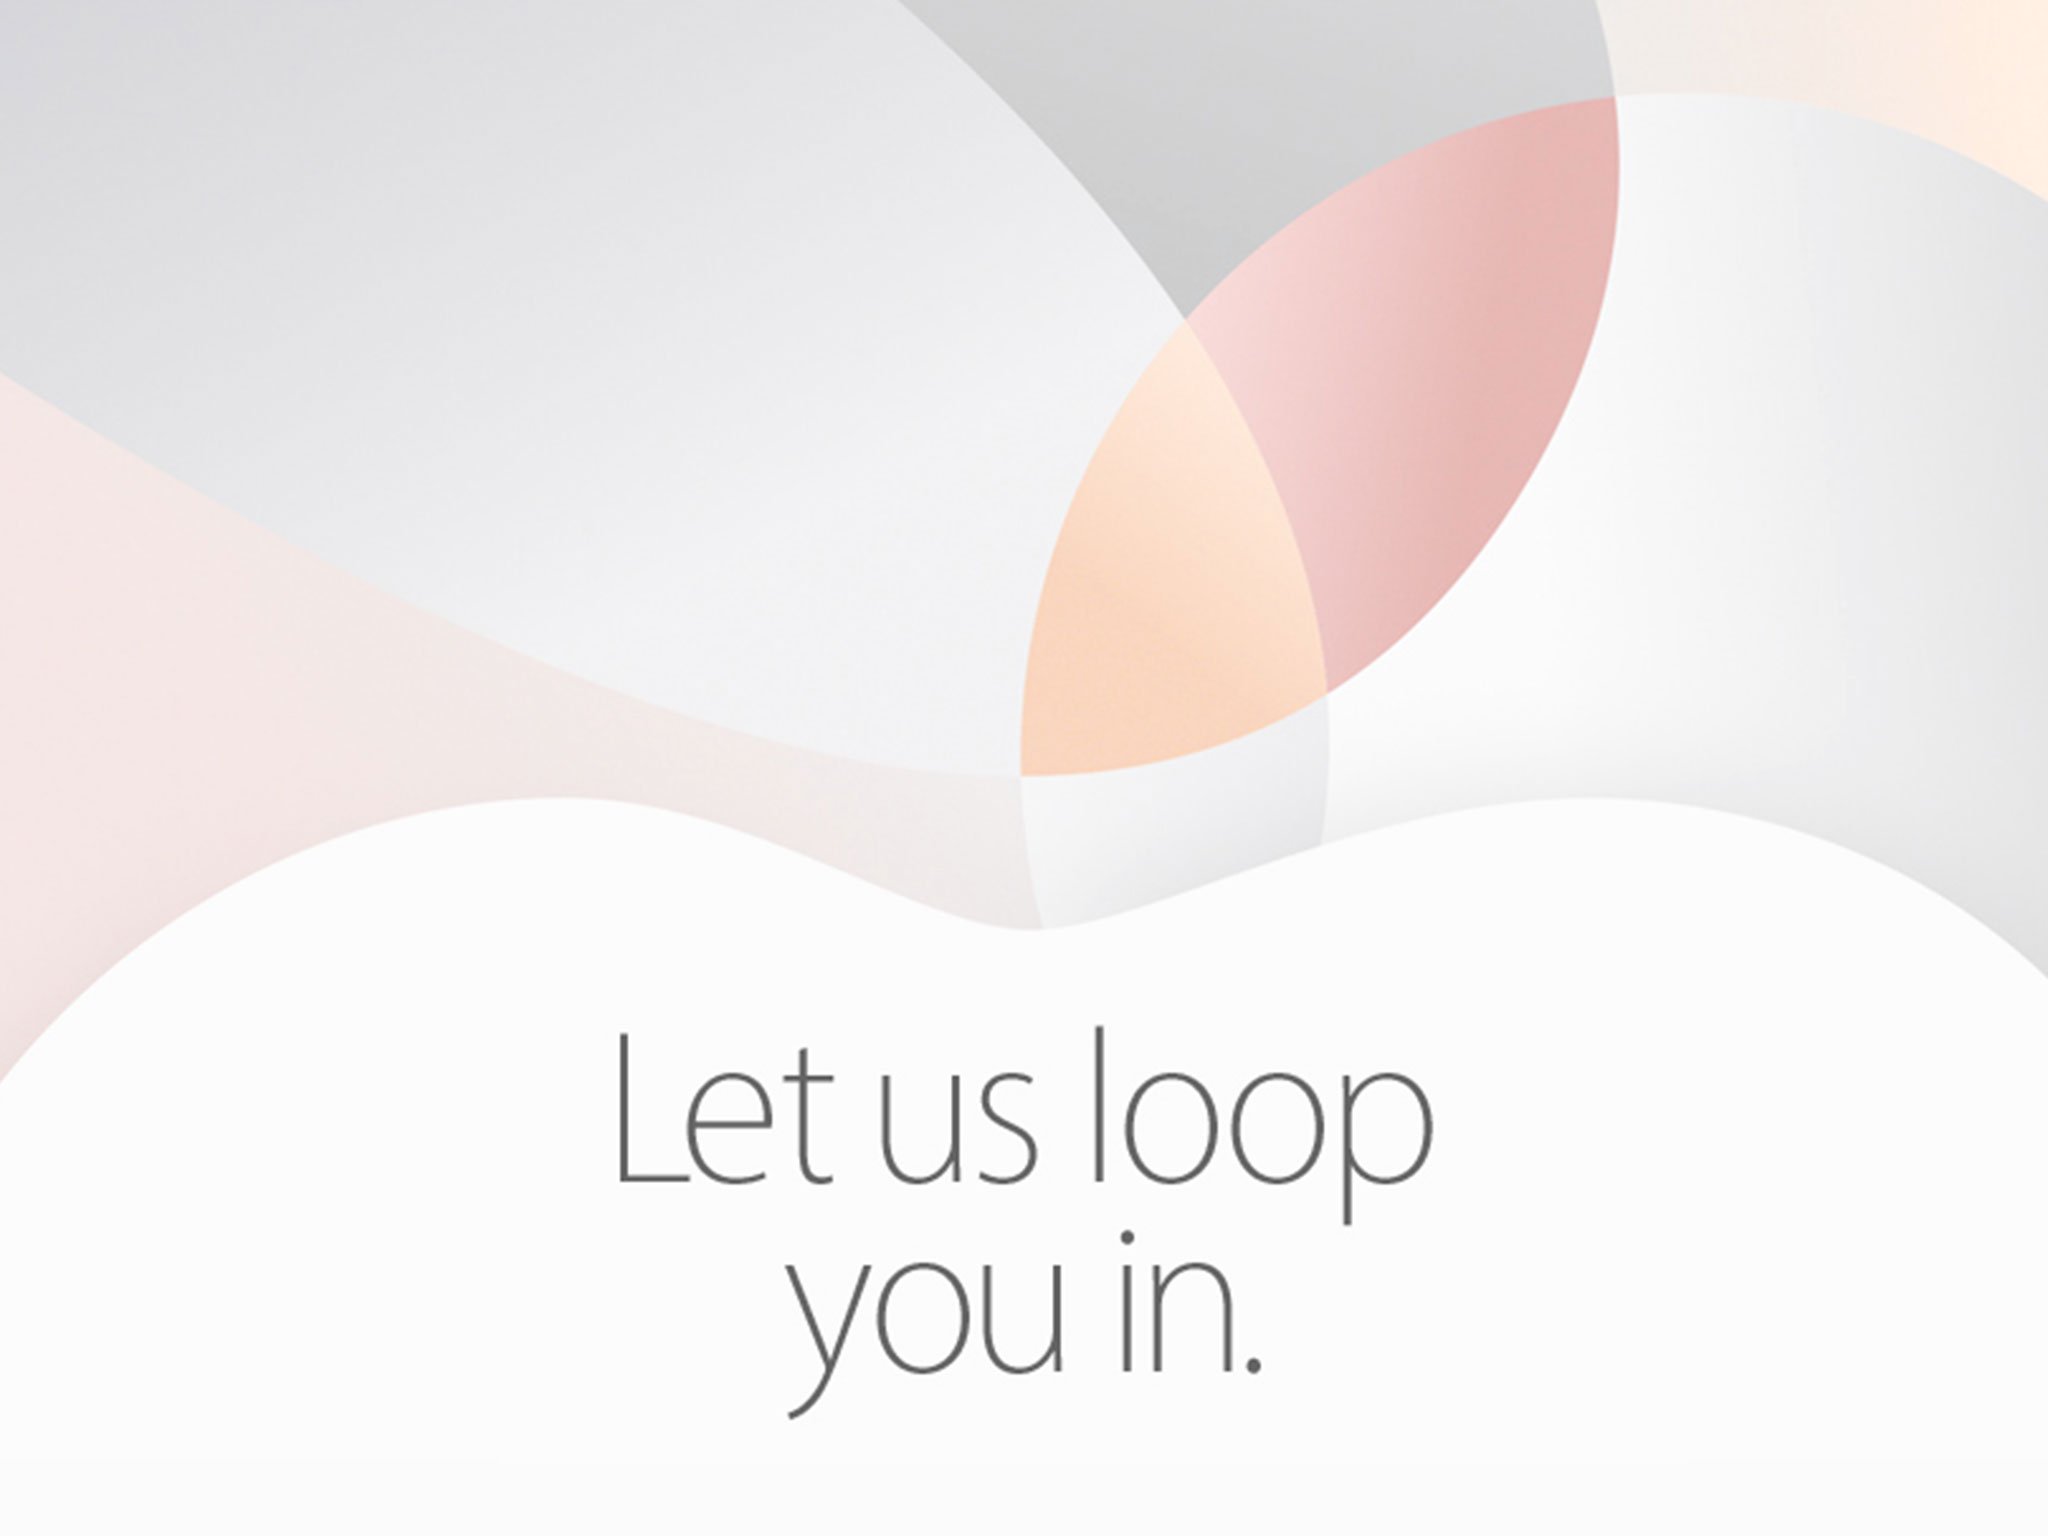 Live from Apple's March 21 'Let us loop you in' event!